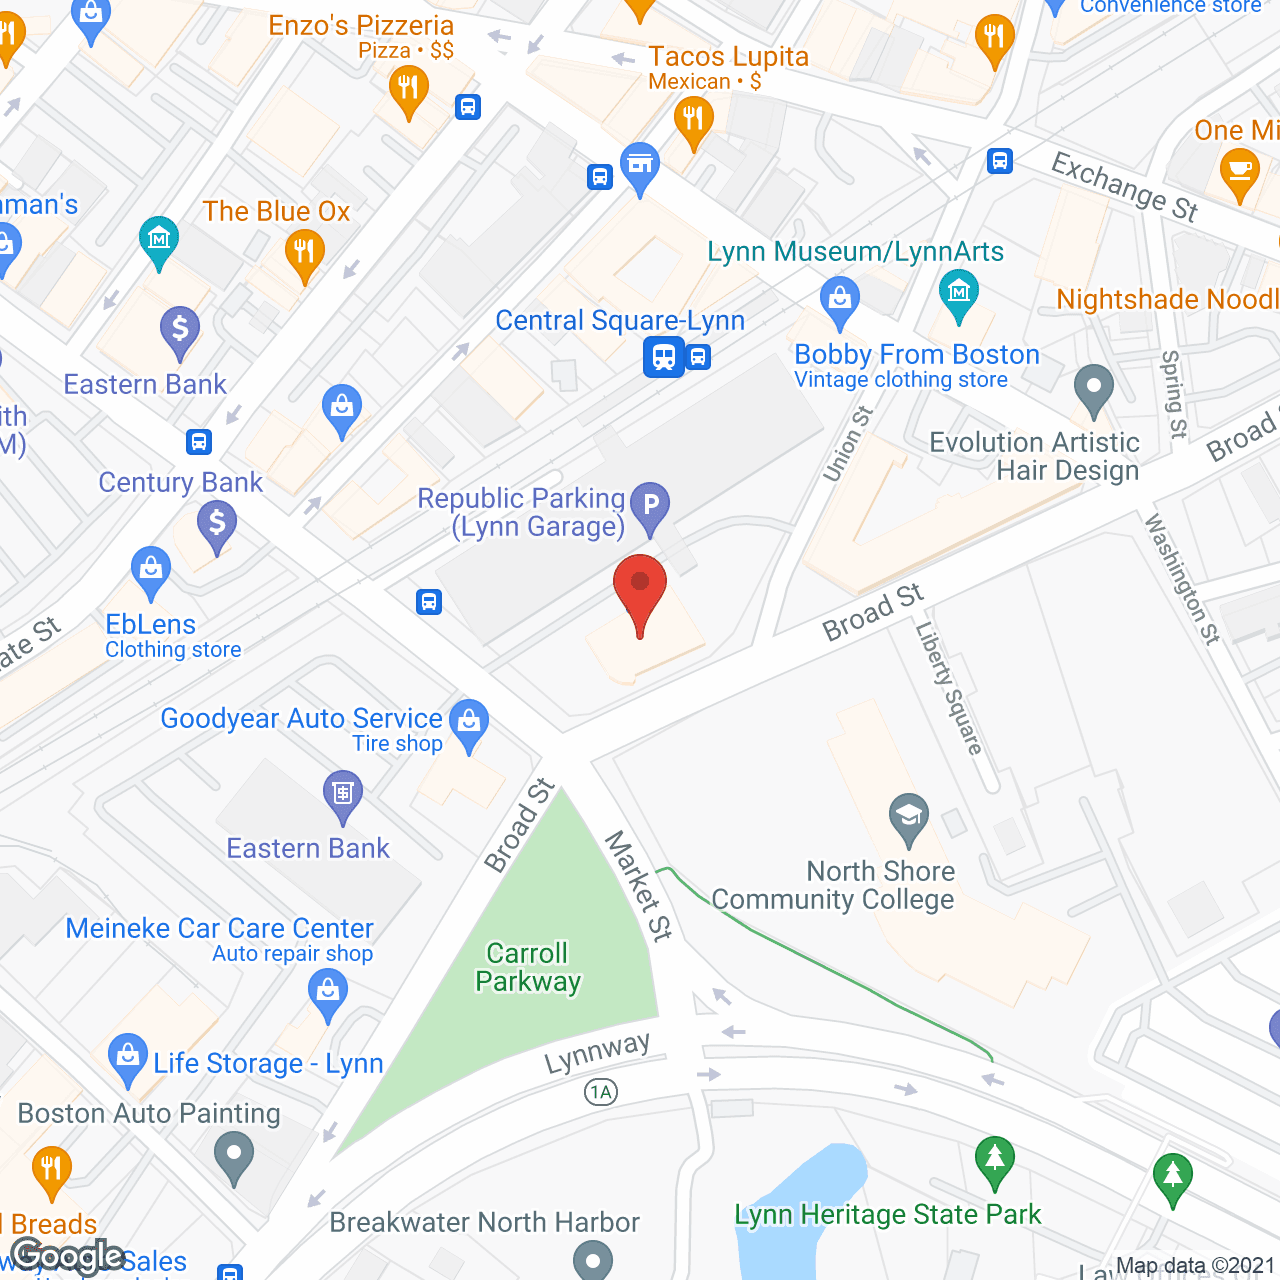 All Care Resources in google map